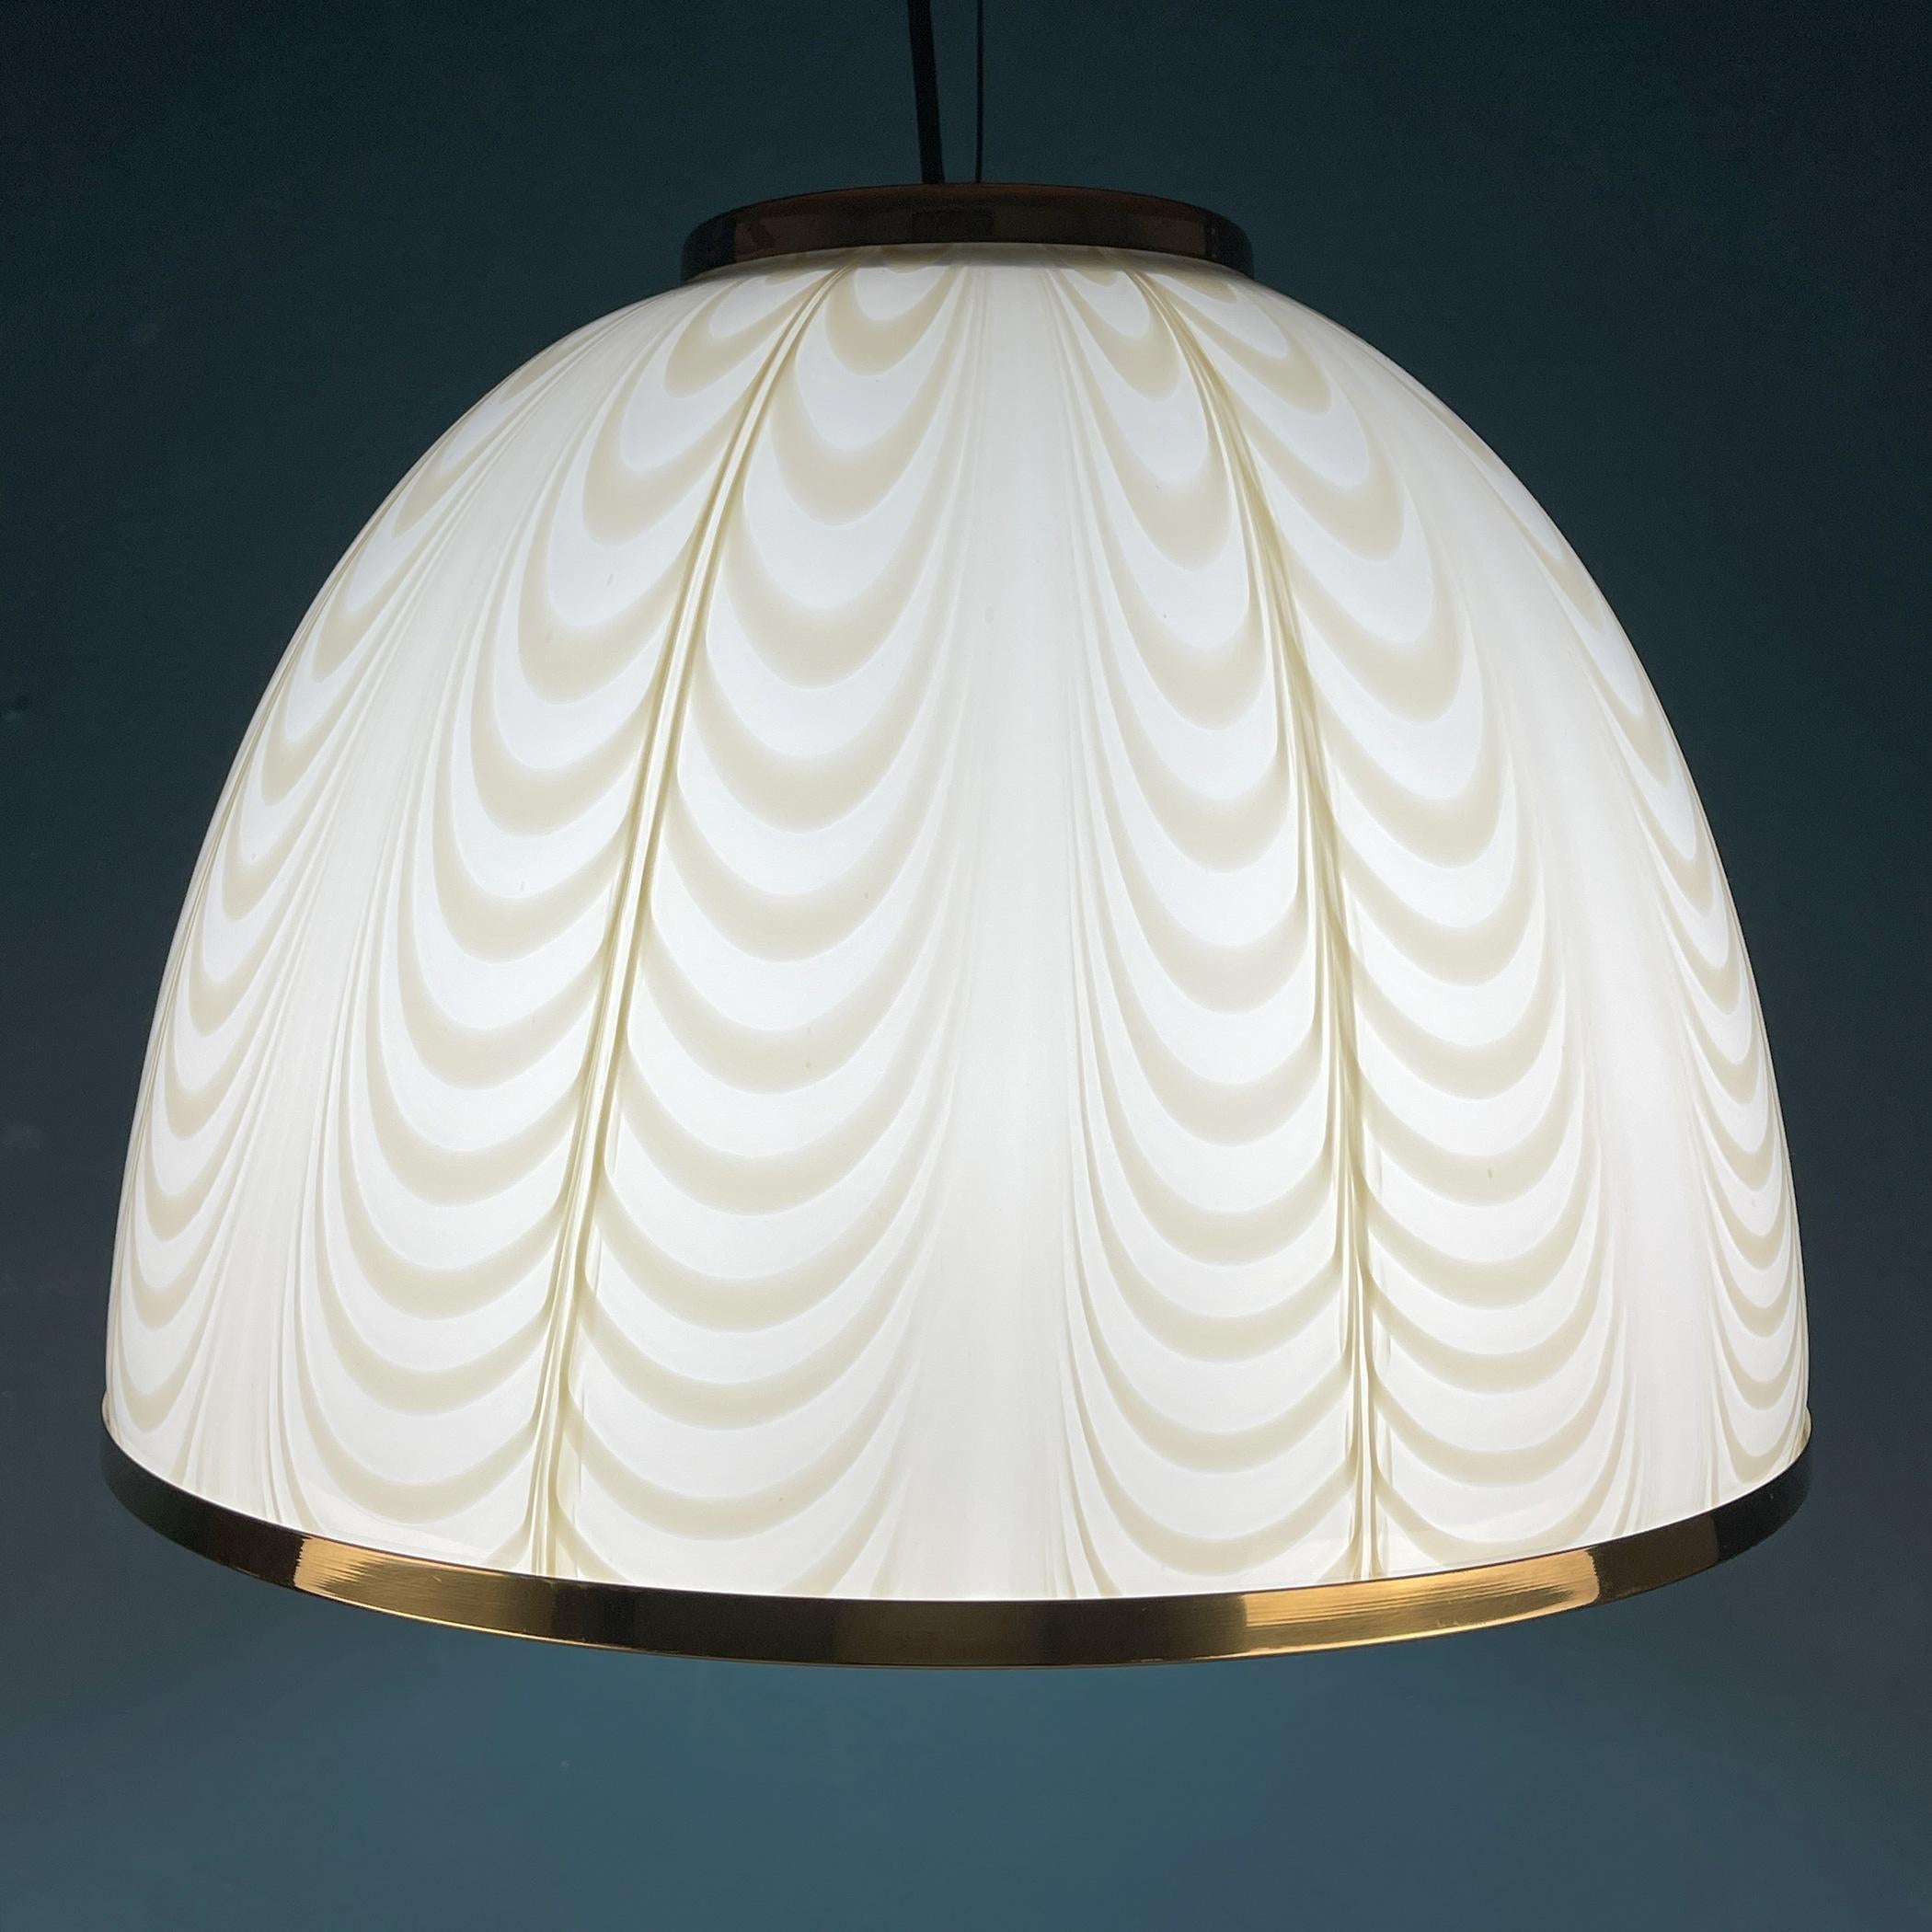 Late 20th Century Vintage White Murano Glass Pendant Lamp by F.Fabbian Italy 70s For Sale